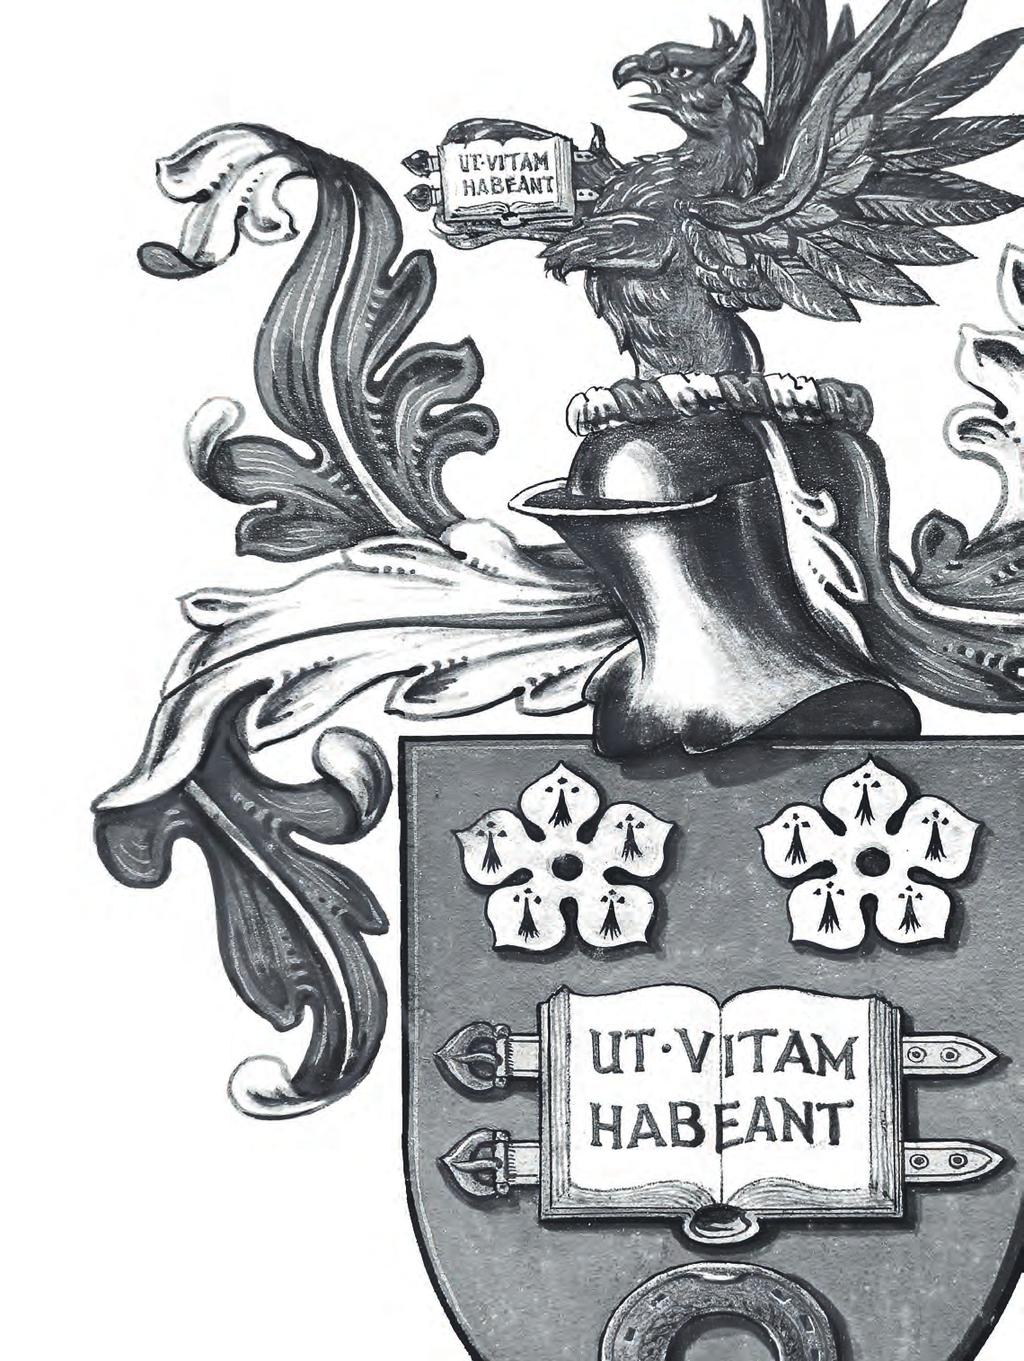 Our values reflect our motto: ut vitam habeant, so that they may have life.